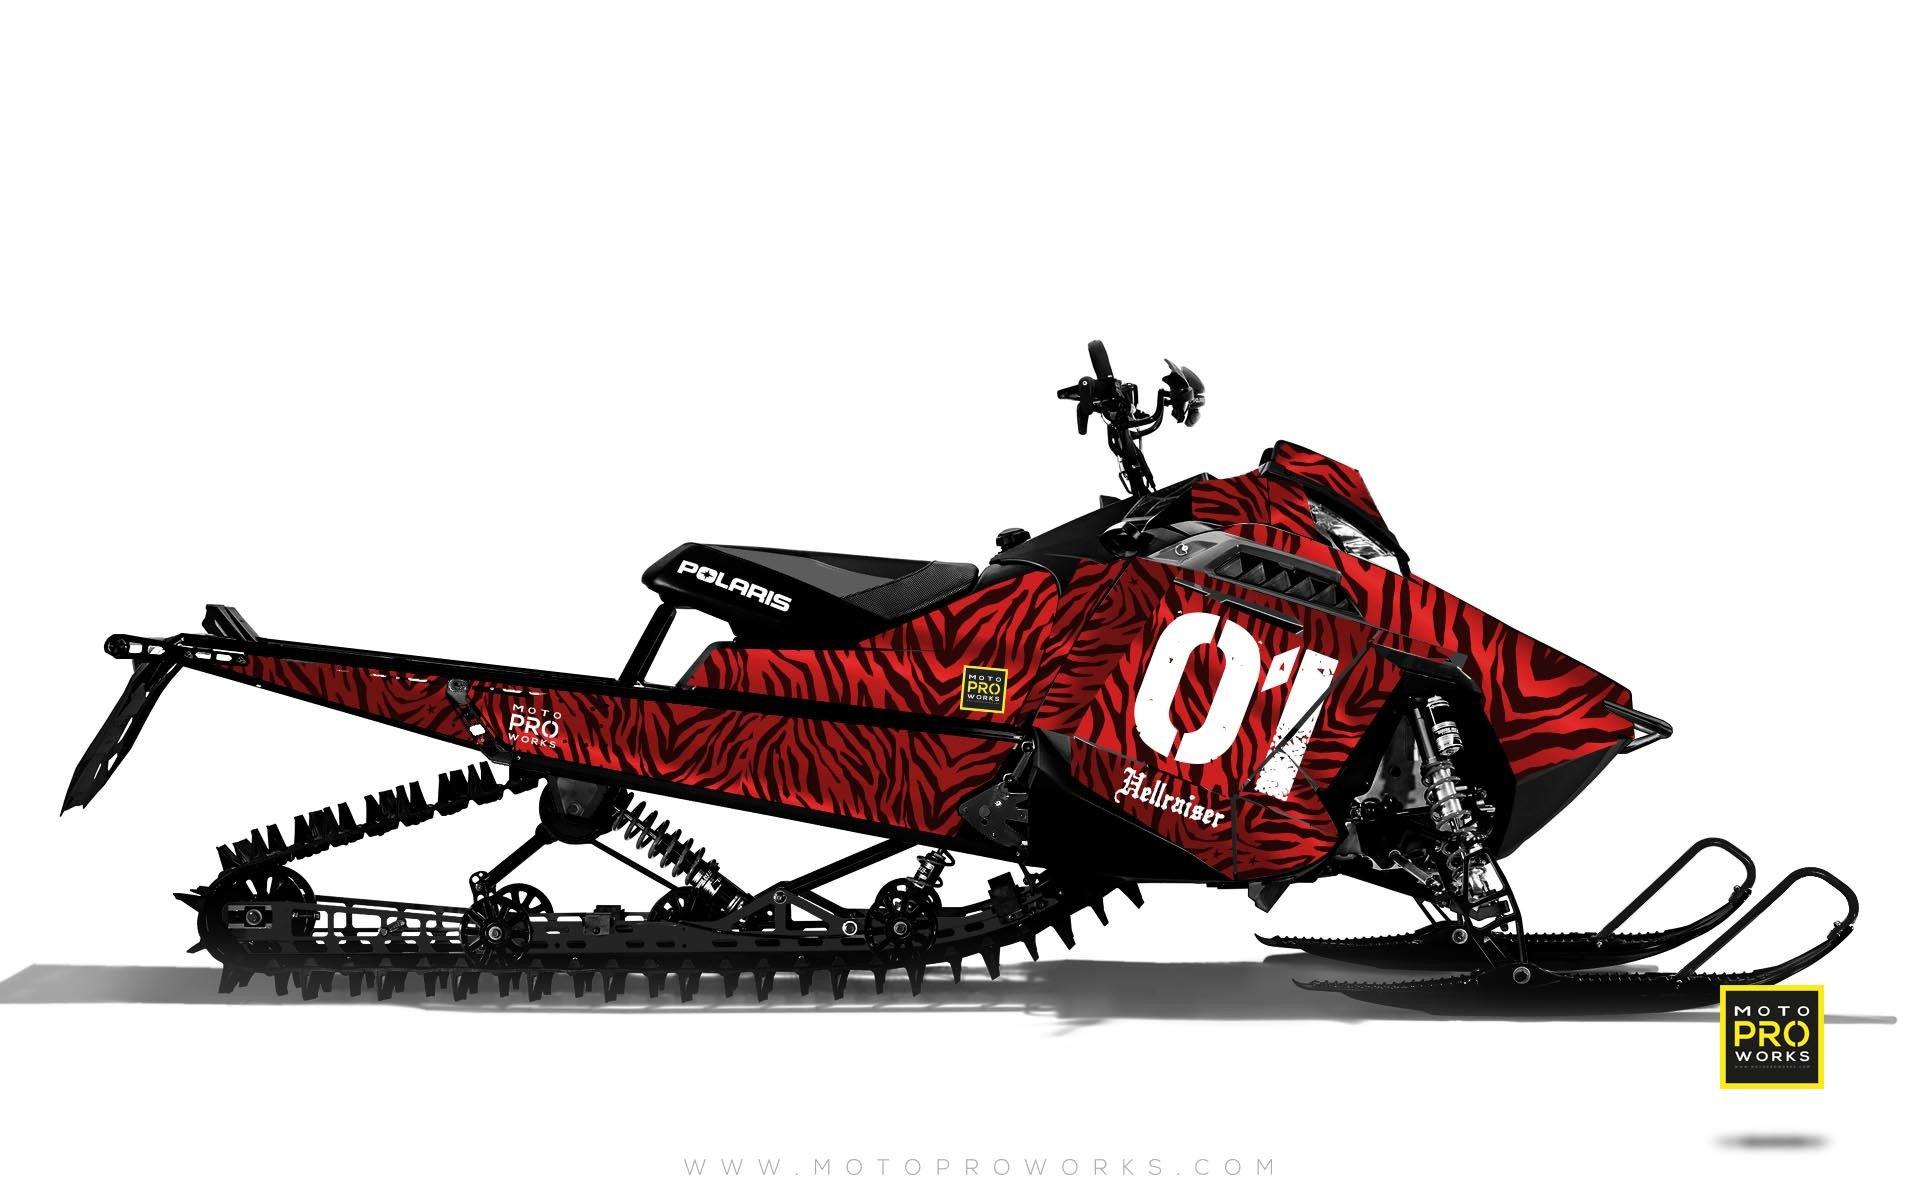 Polaris Graphics - "Stripey" (red) - MotoProWorks | Decals and Bike Graphic kit